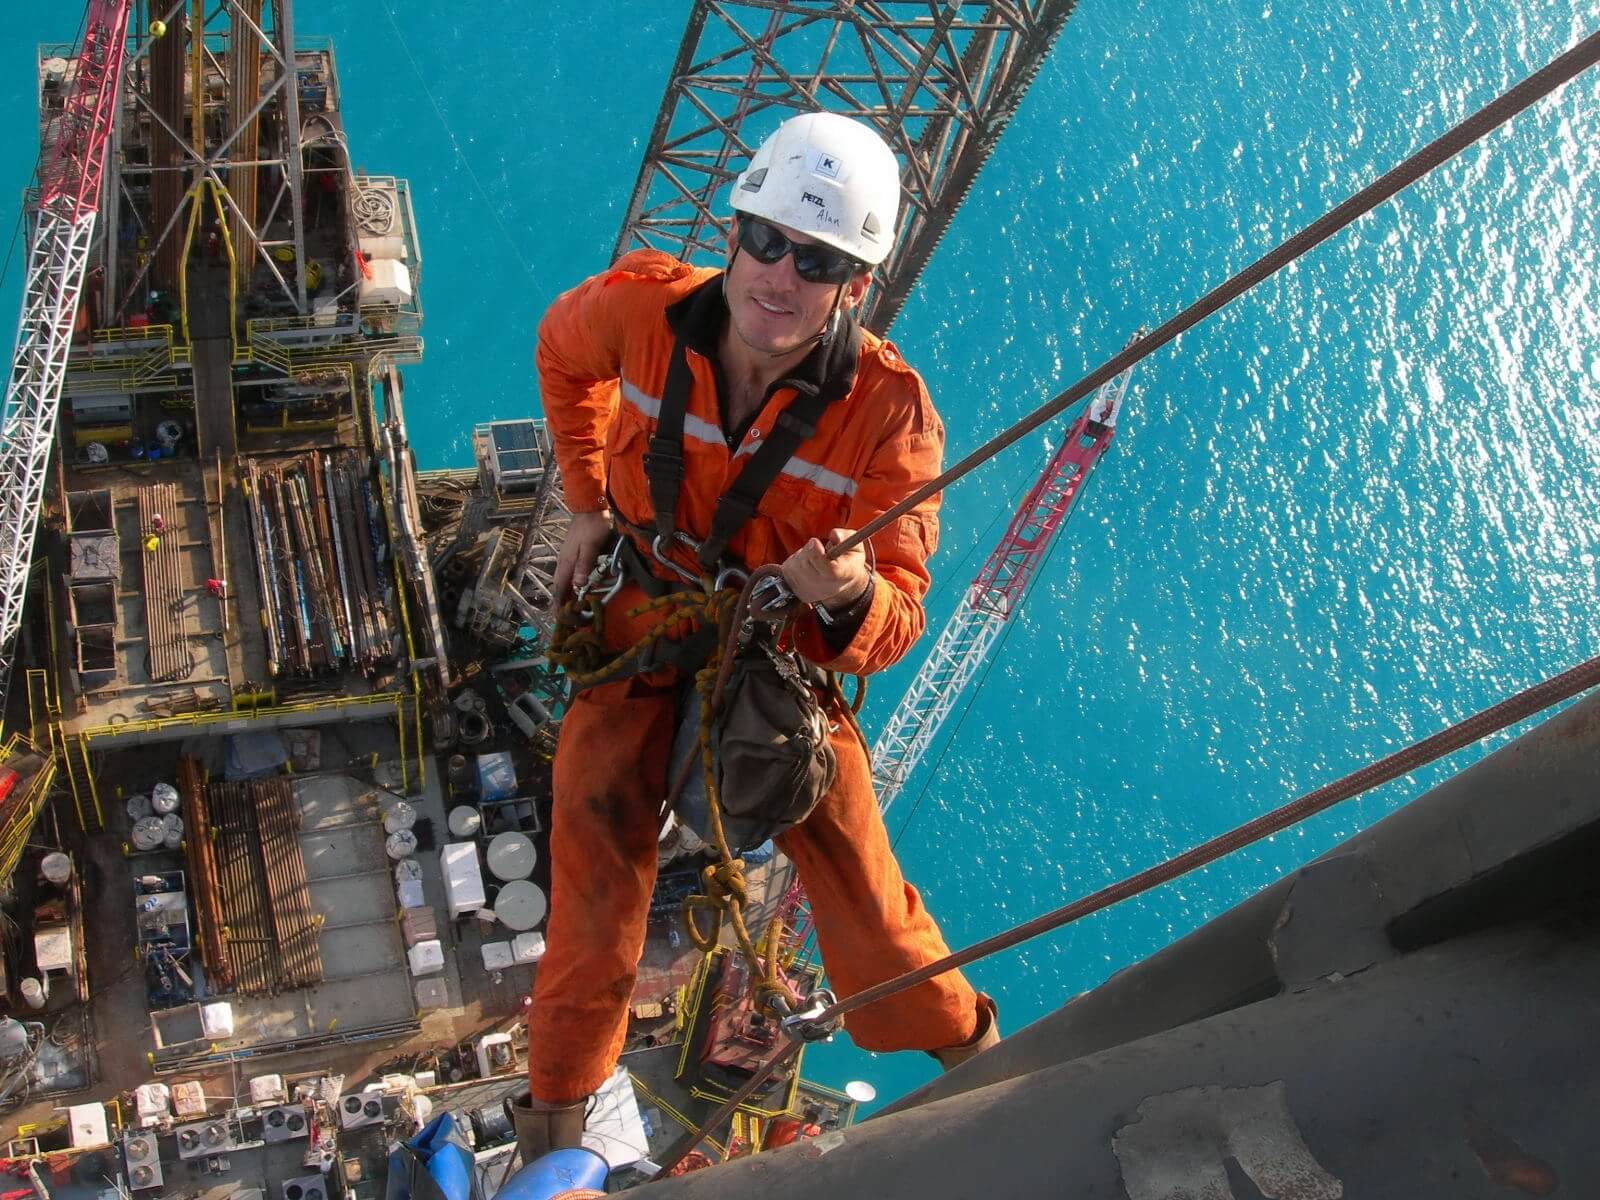 Rope access worker suspended above an ocean barge